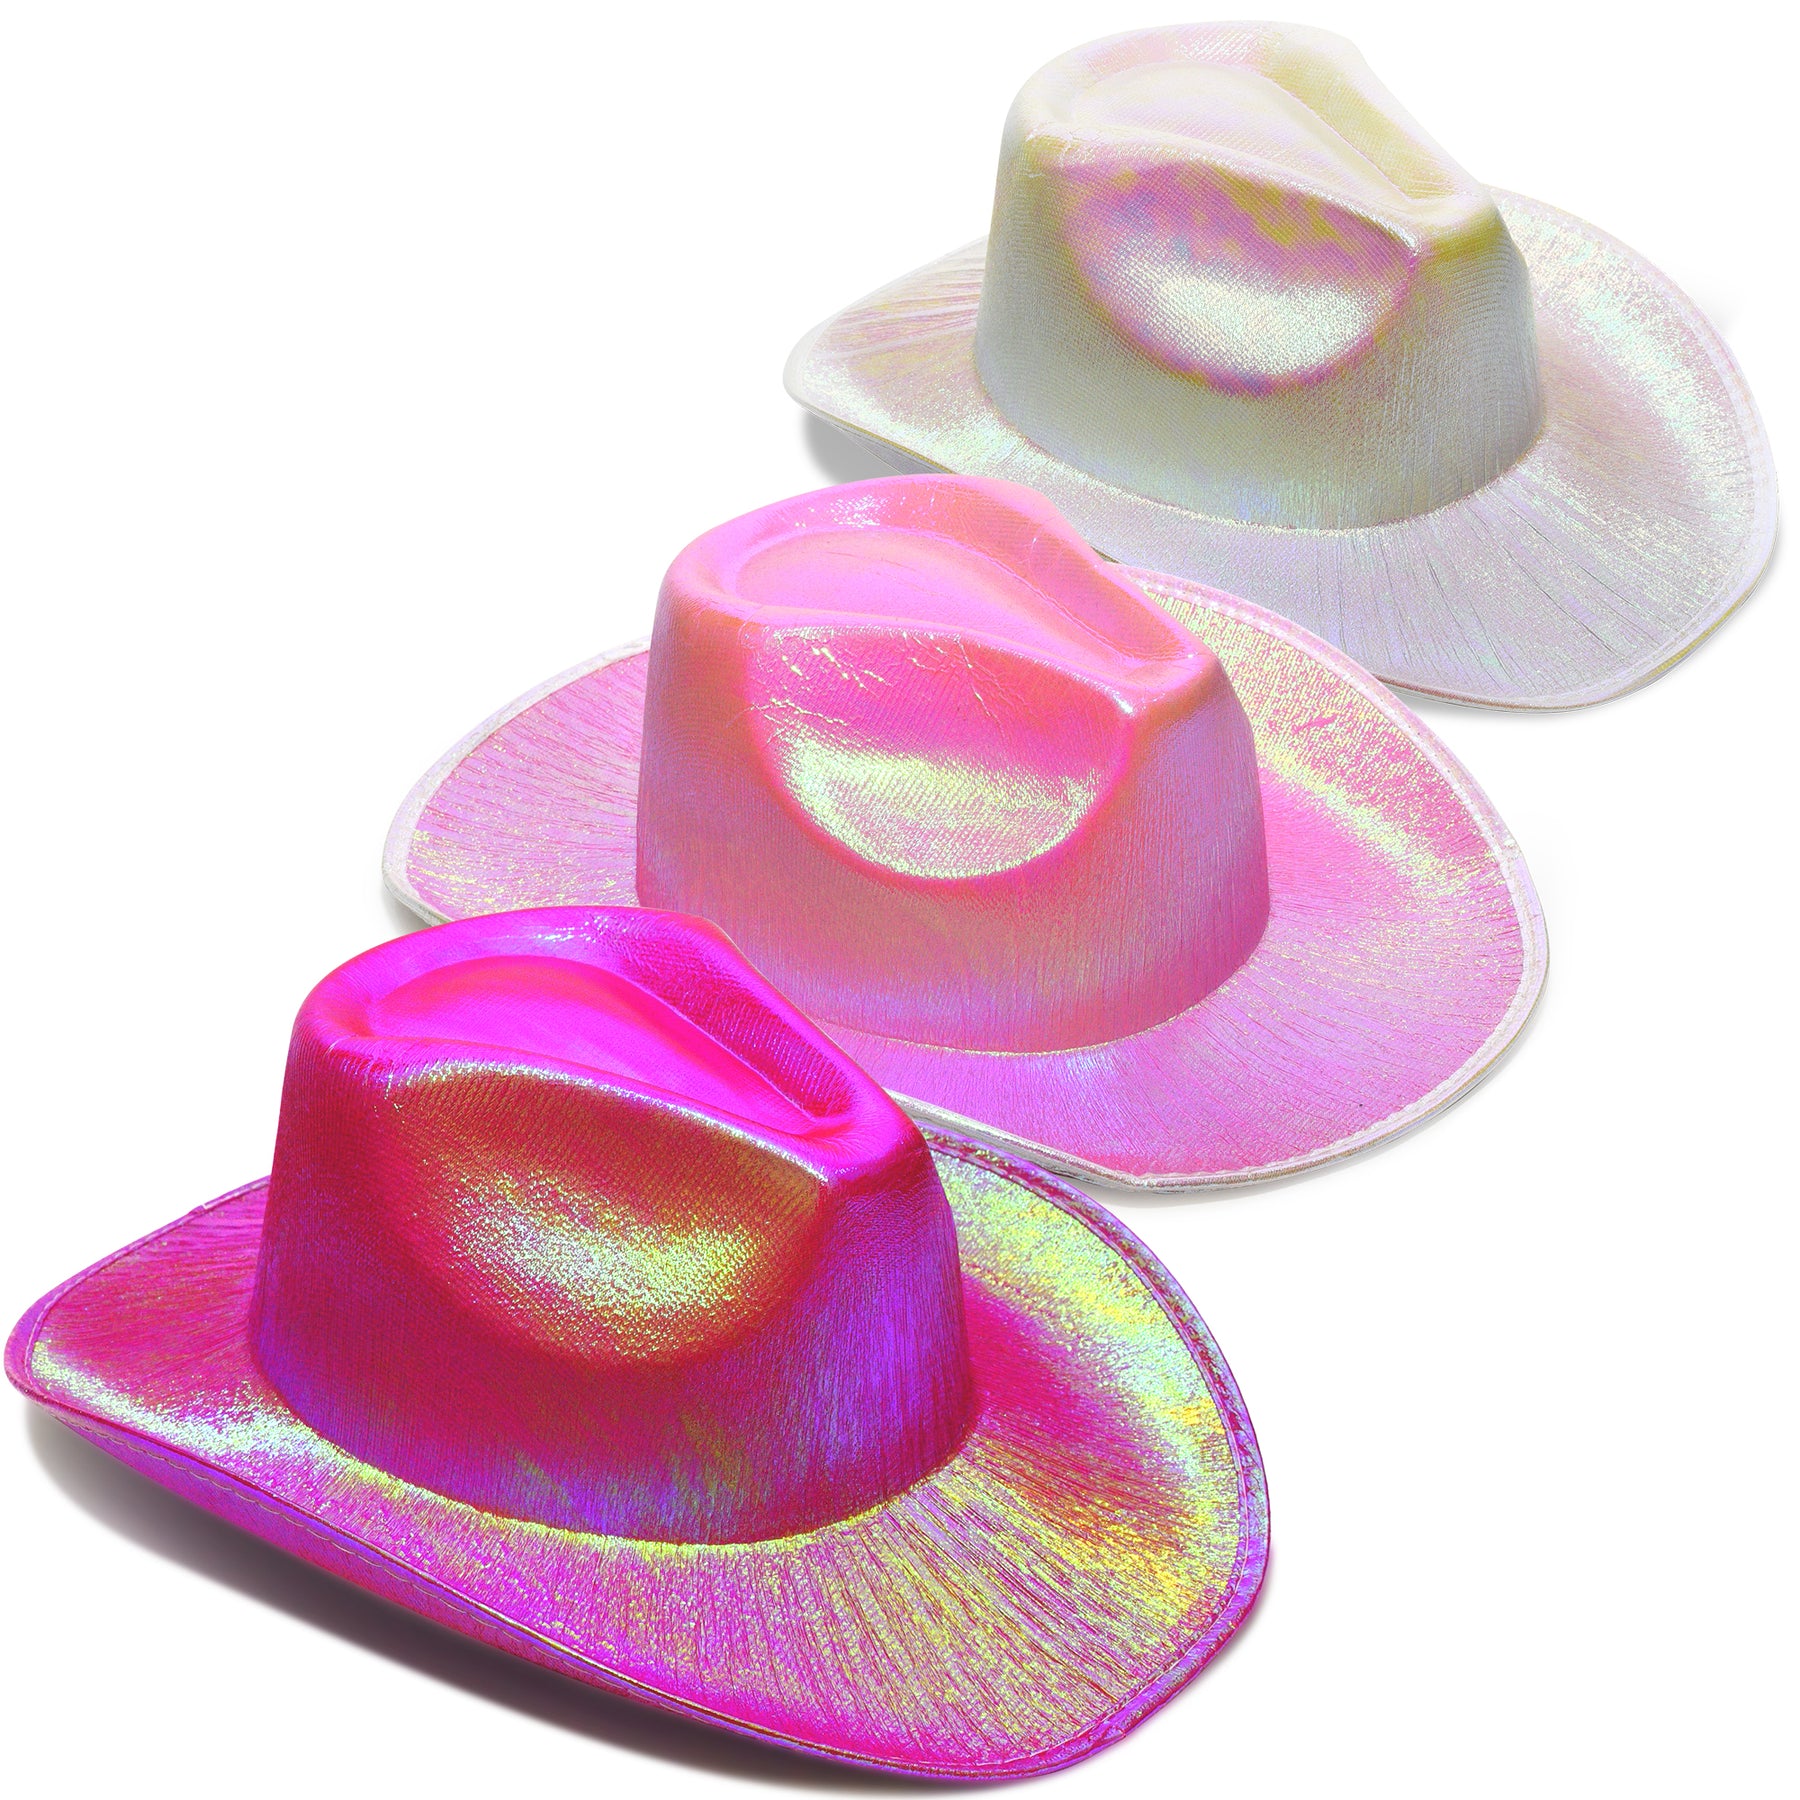 3 Pack Pink, Hot Pink, Silver Neon Sparkly Glitter Space Cowboy Hat - Fun Metallic Pink Holographic Halloween Party Disco Cowgirl Hat